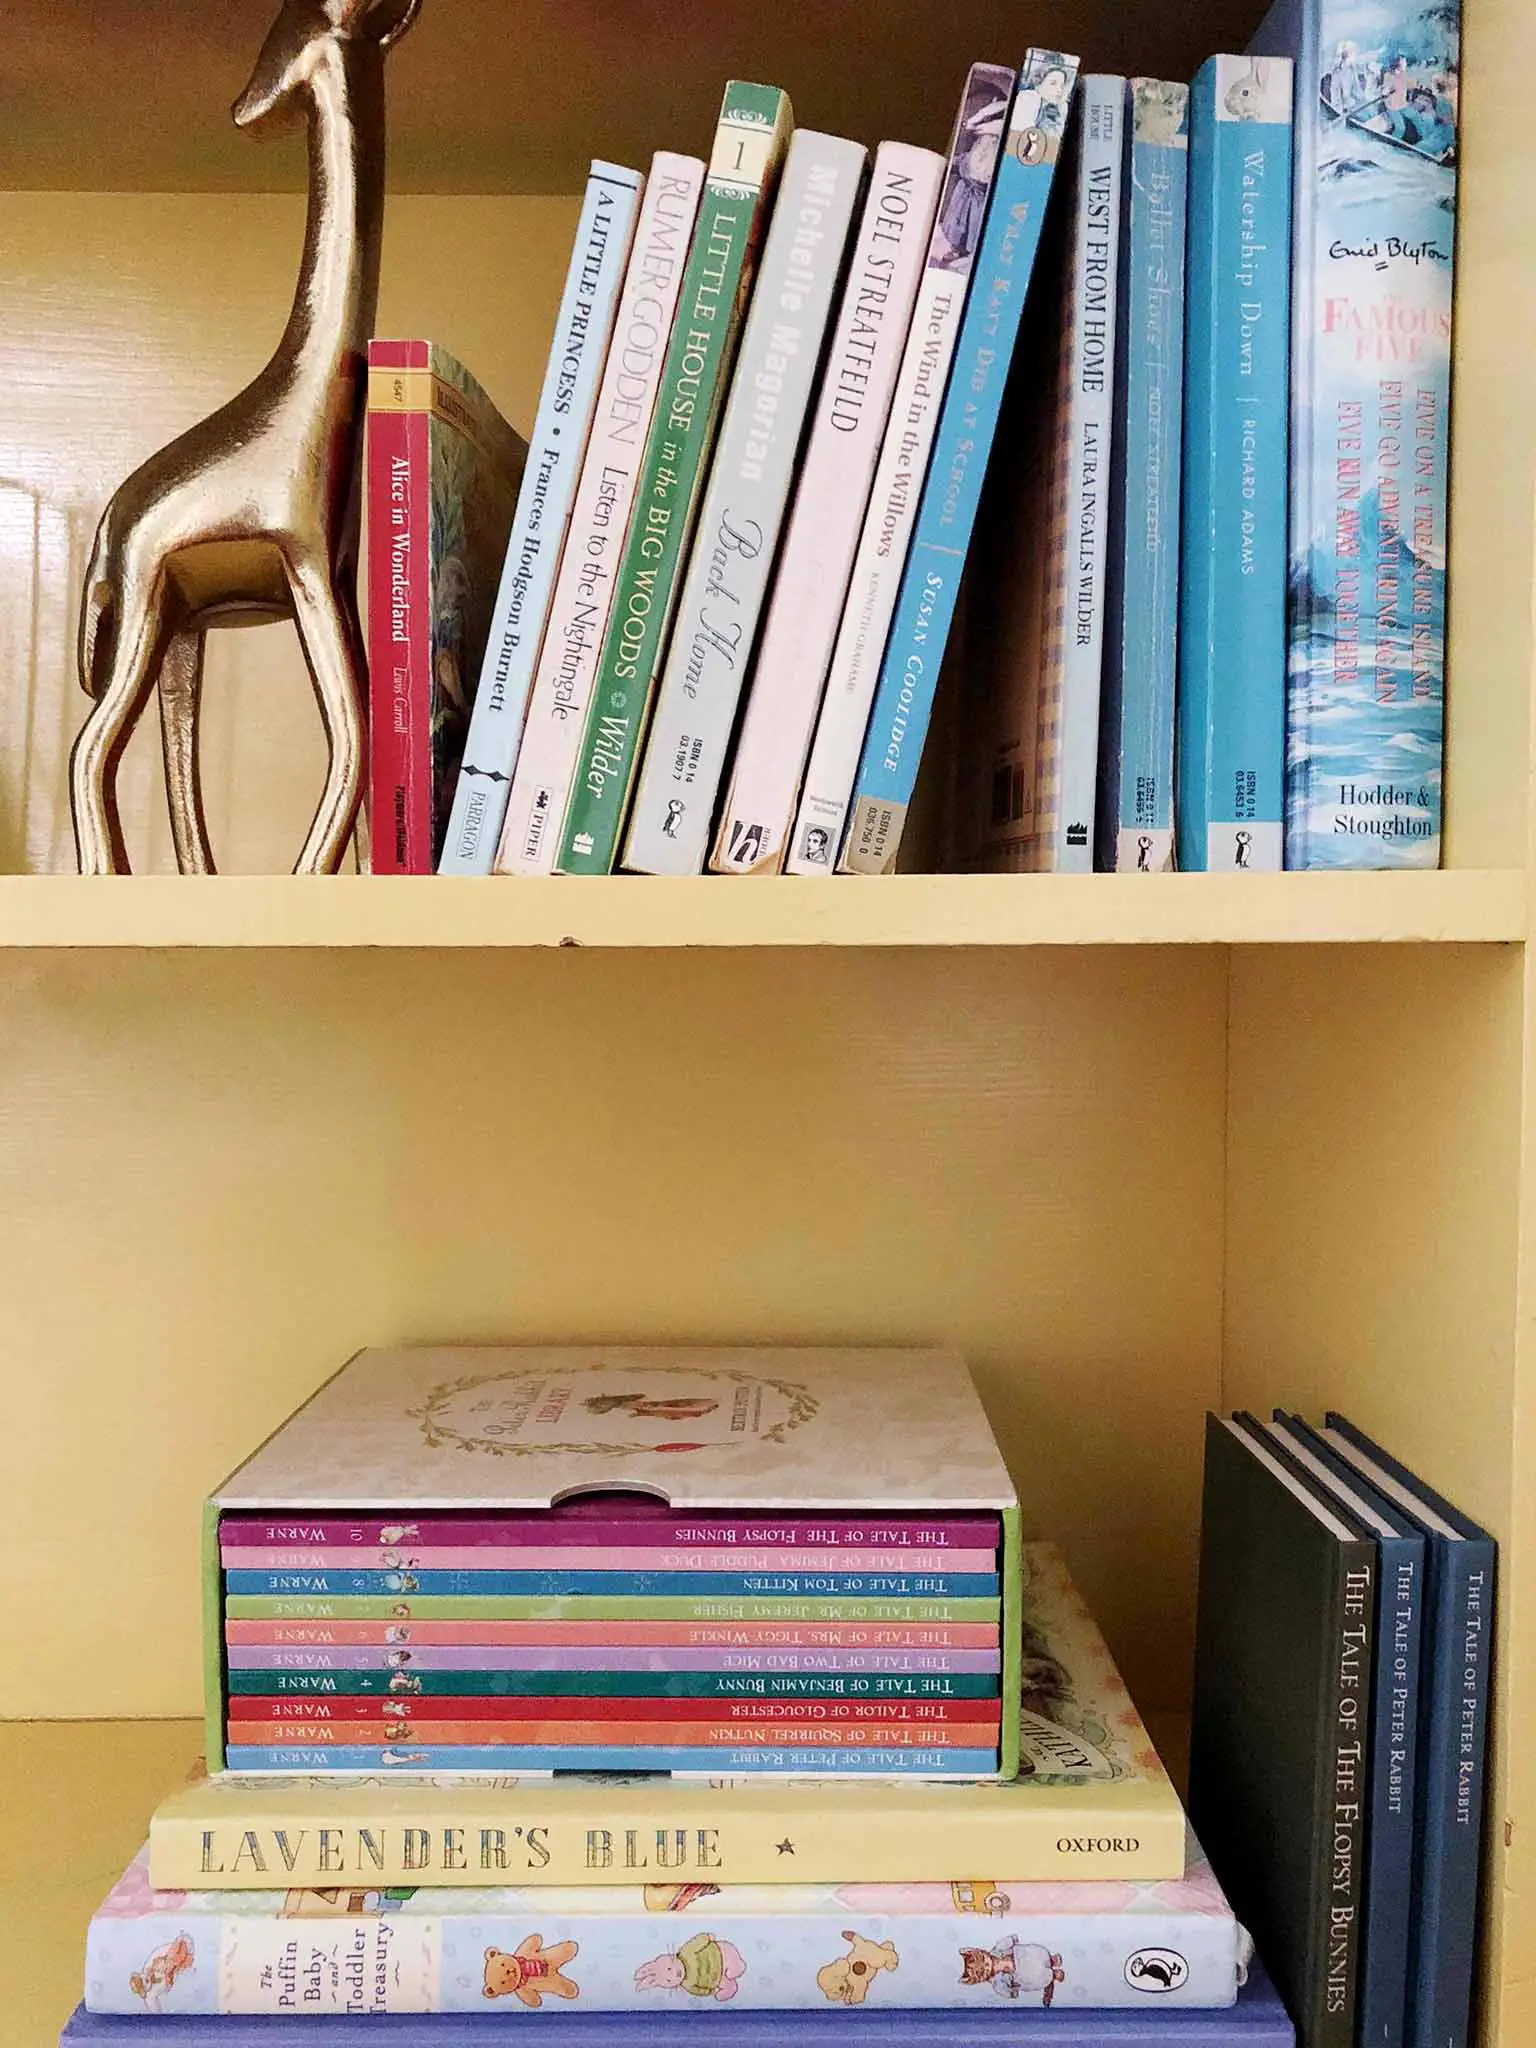 Book shelf styling - How to Declutter, Organize and Style Kids' Books - That Homebird Life Blog